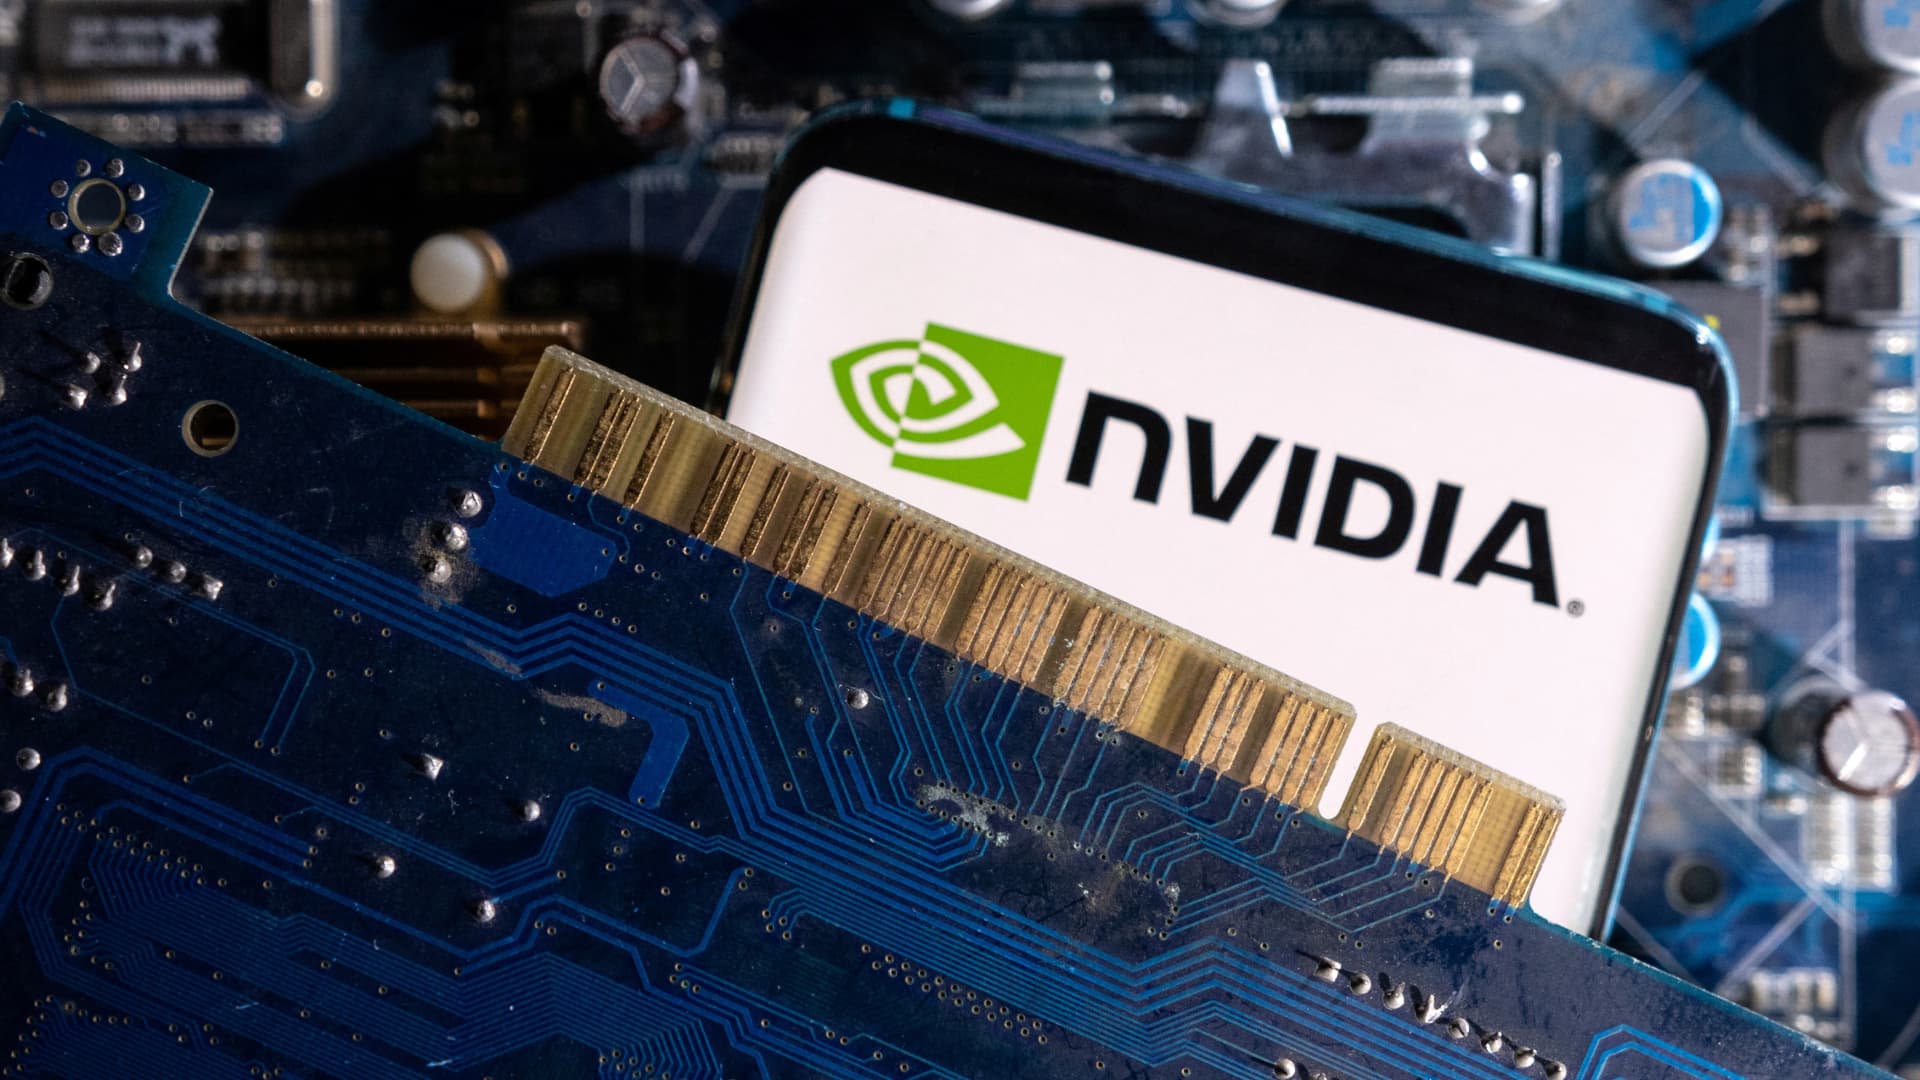 Buy Nvidia stock now or wait for another drop? Two fund managers disagree